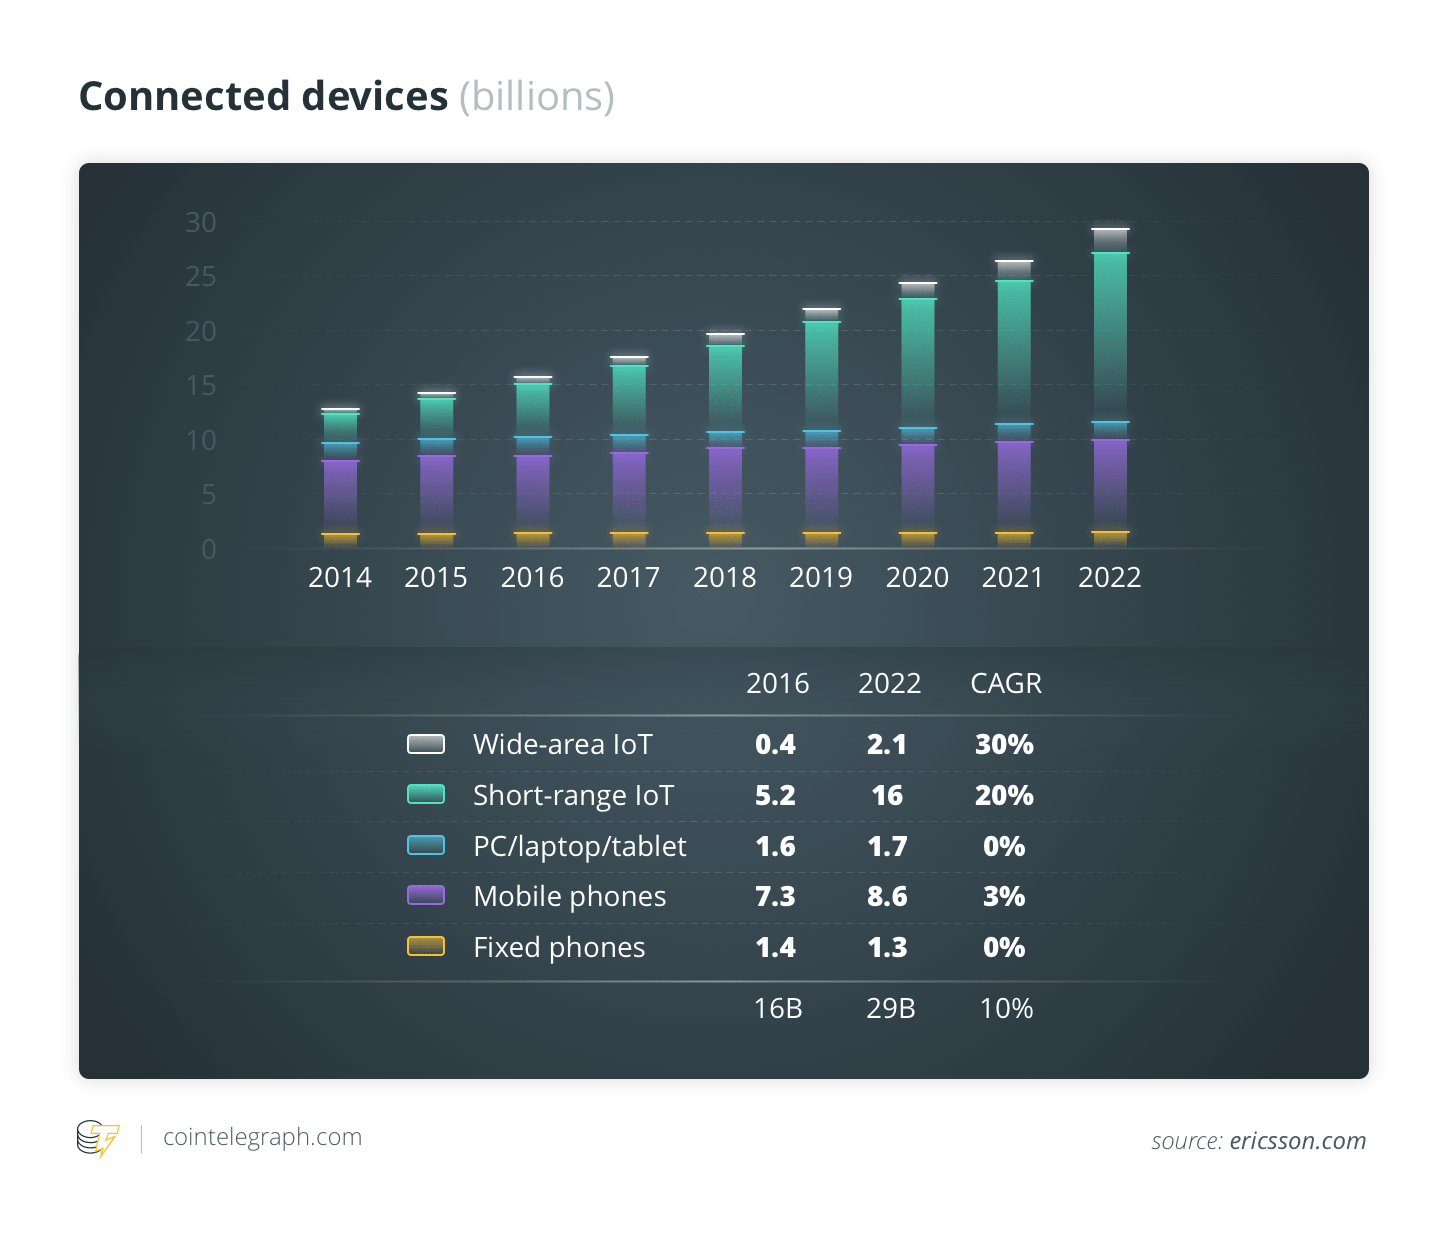 Connected devices (billions)